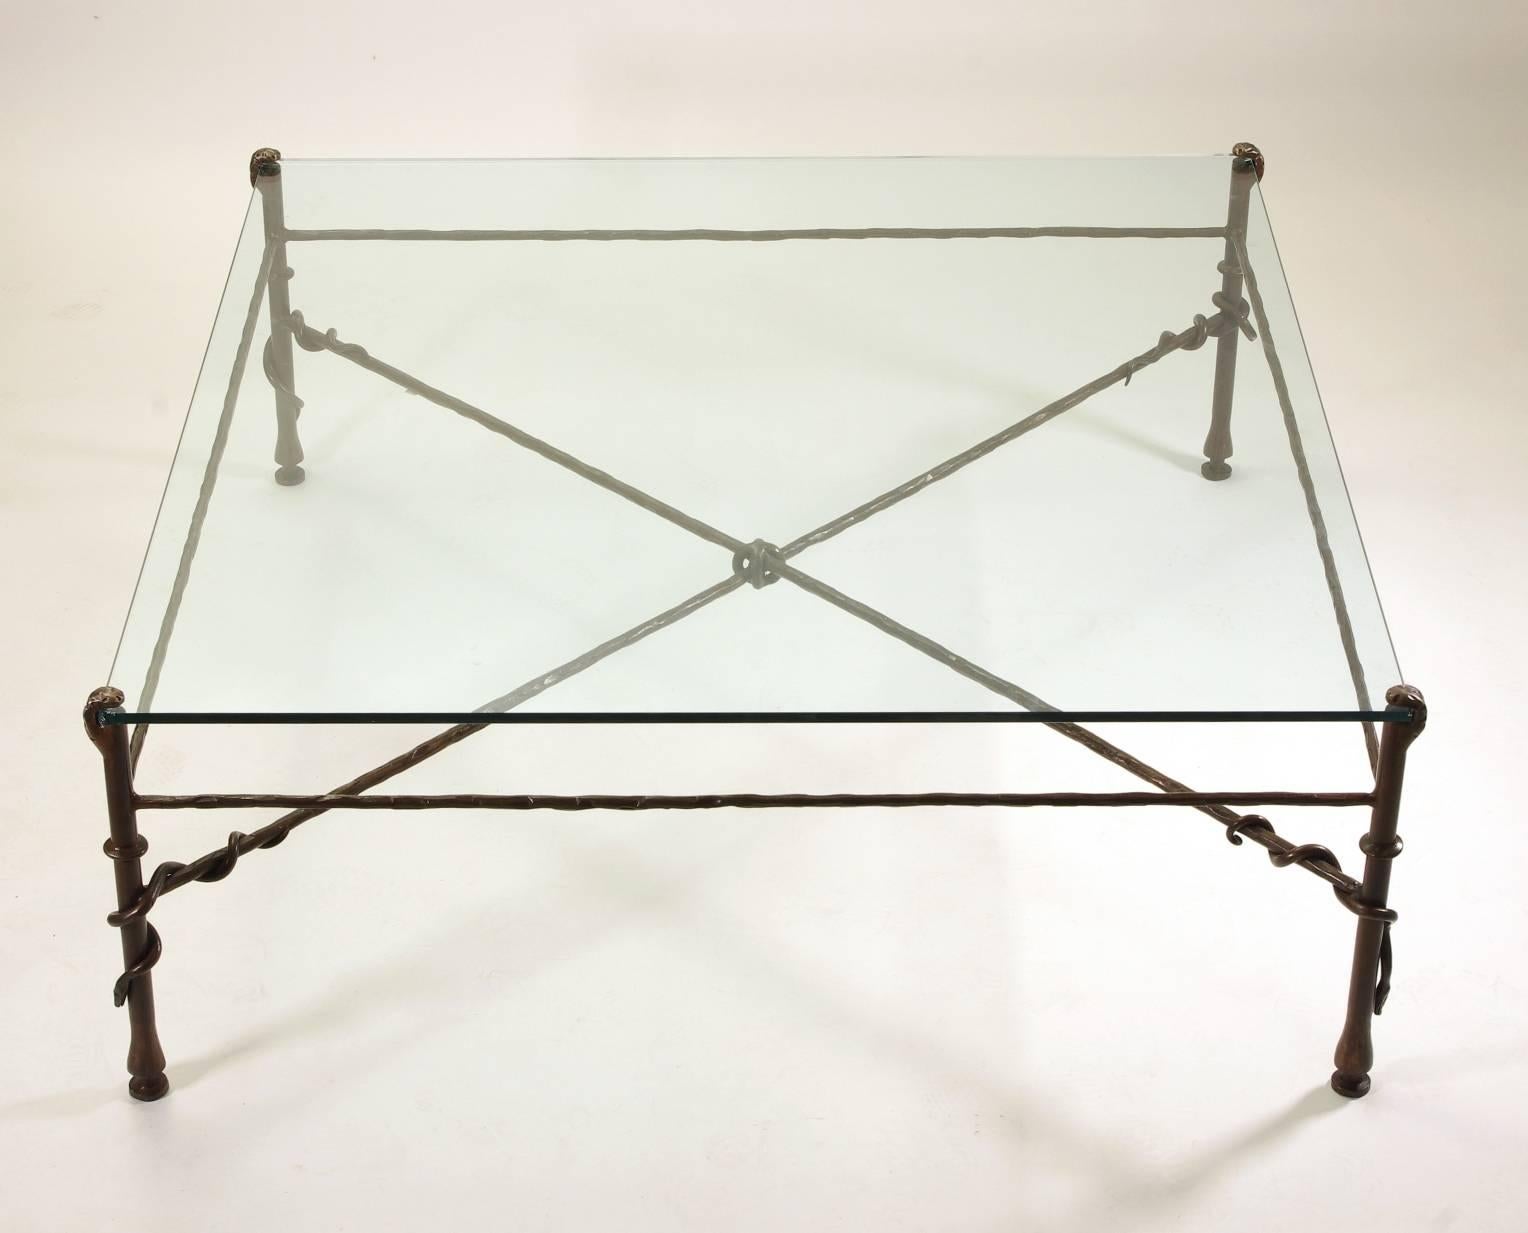 Giacometti inspired wrought iron and glass coffee table, the glass plate supported by four legs, each with an entwined snake, joined by an X-stretcher tied with a knot.